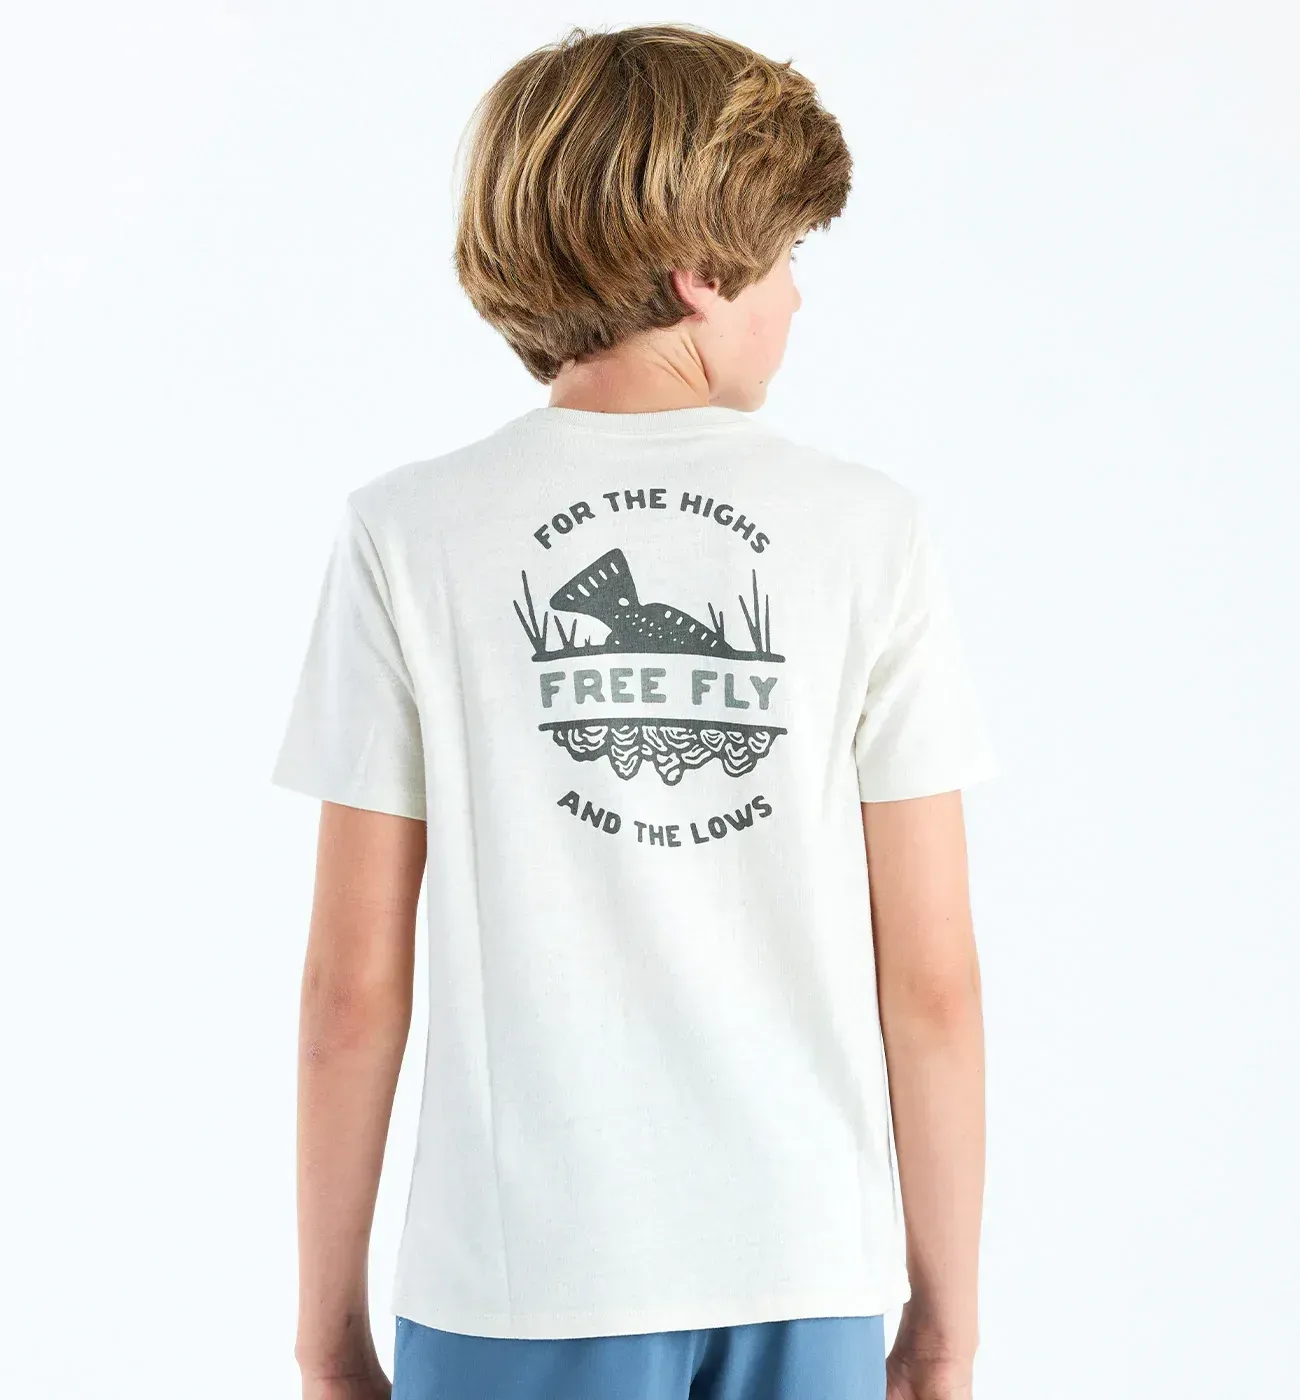 Boys High and Lows Tee - Heather Oyster, Size: SM (7/8)